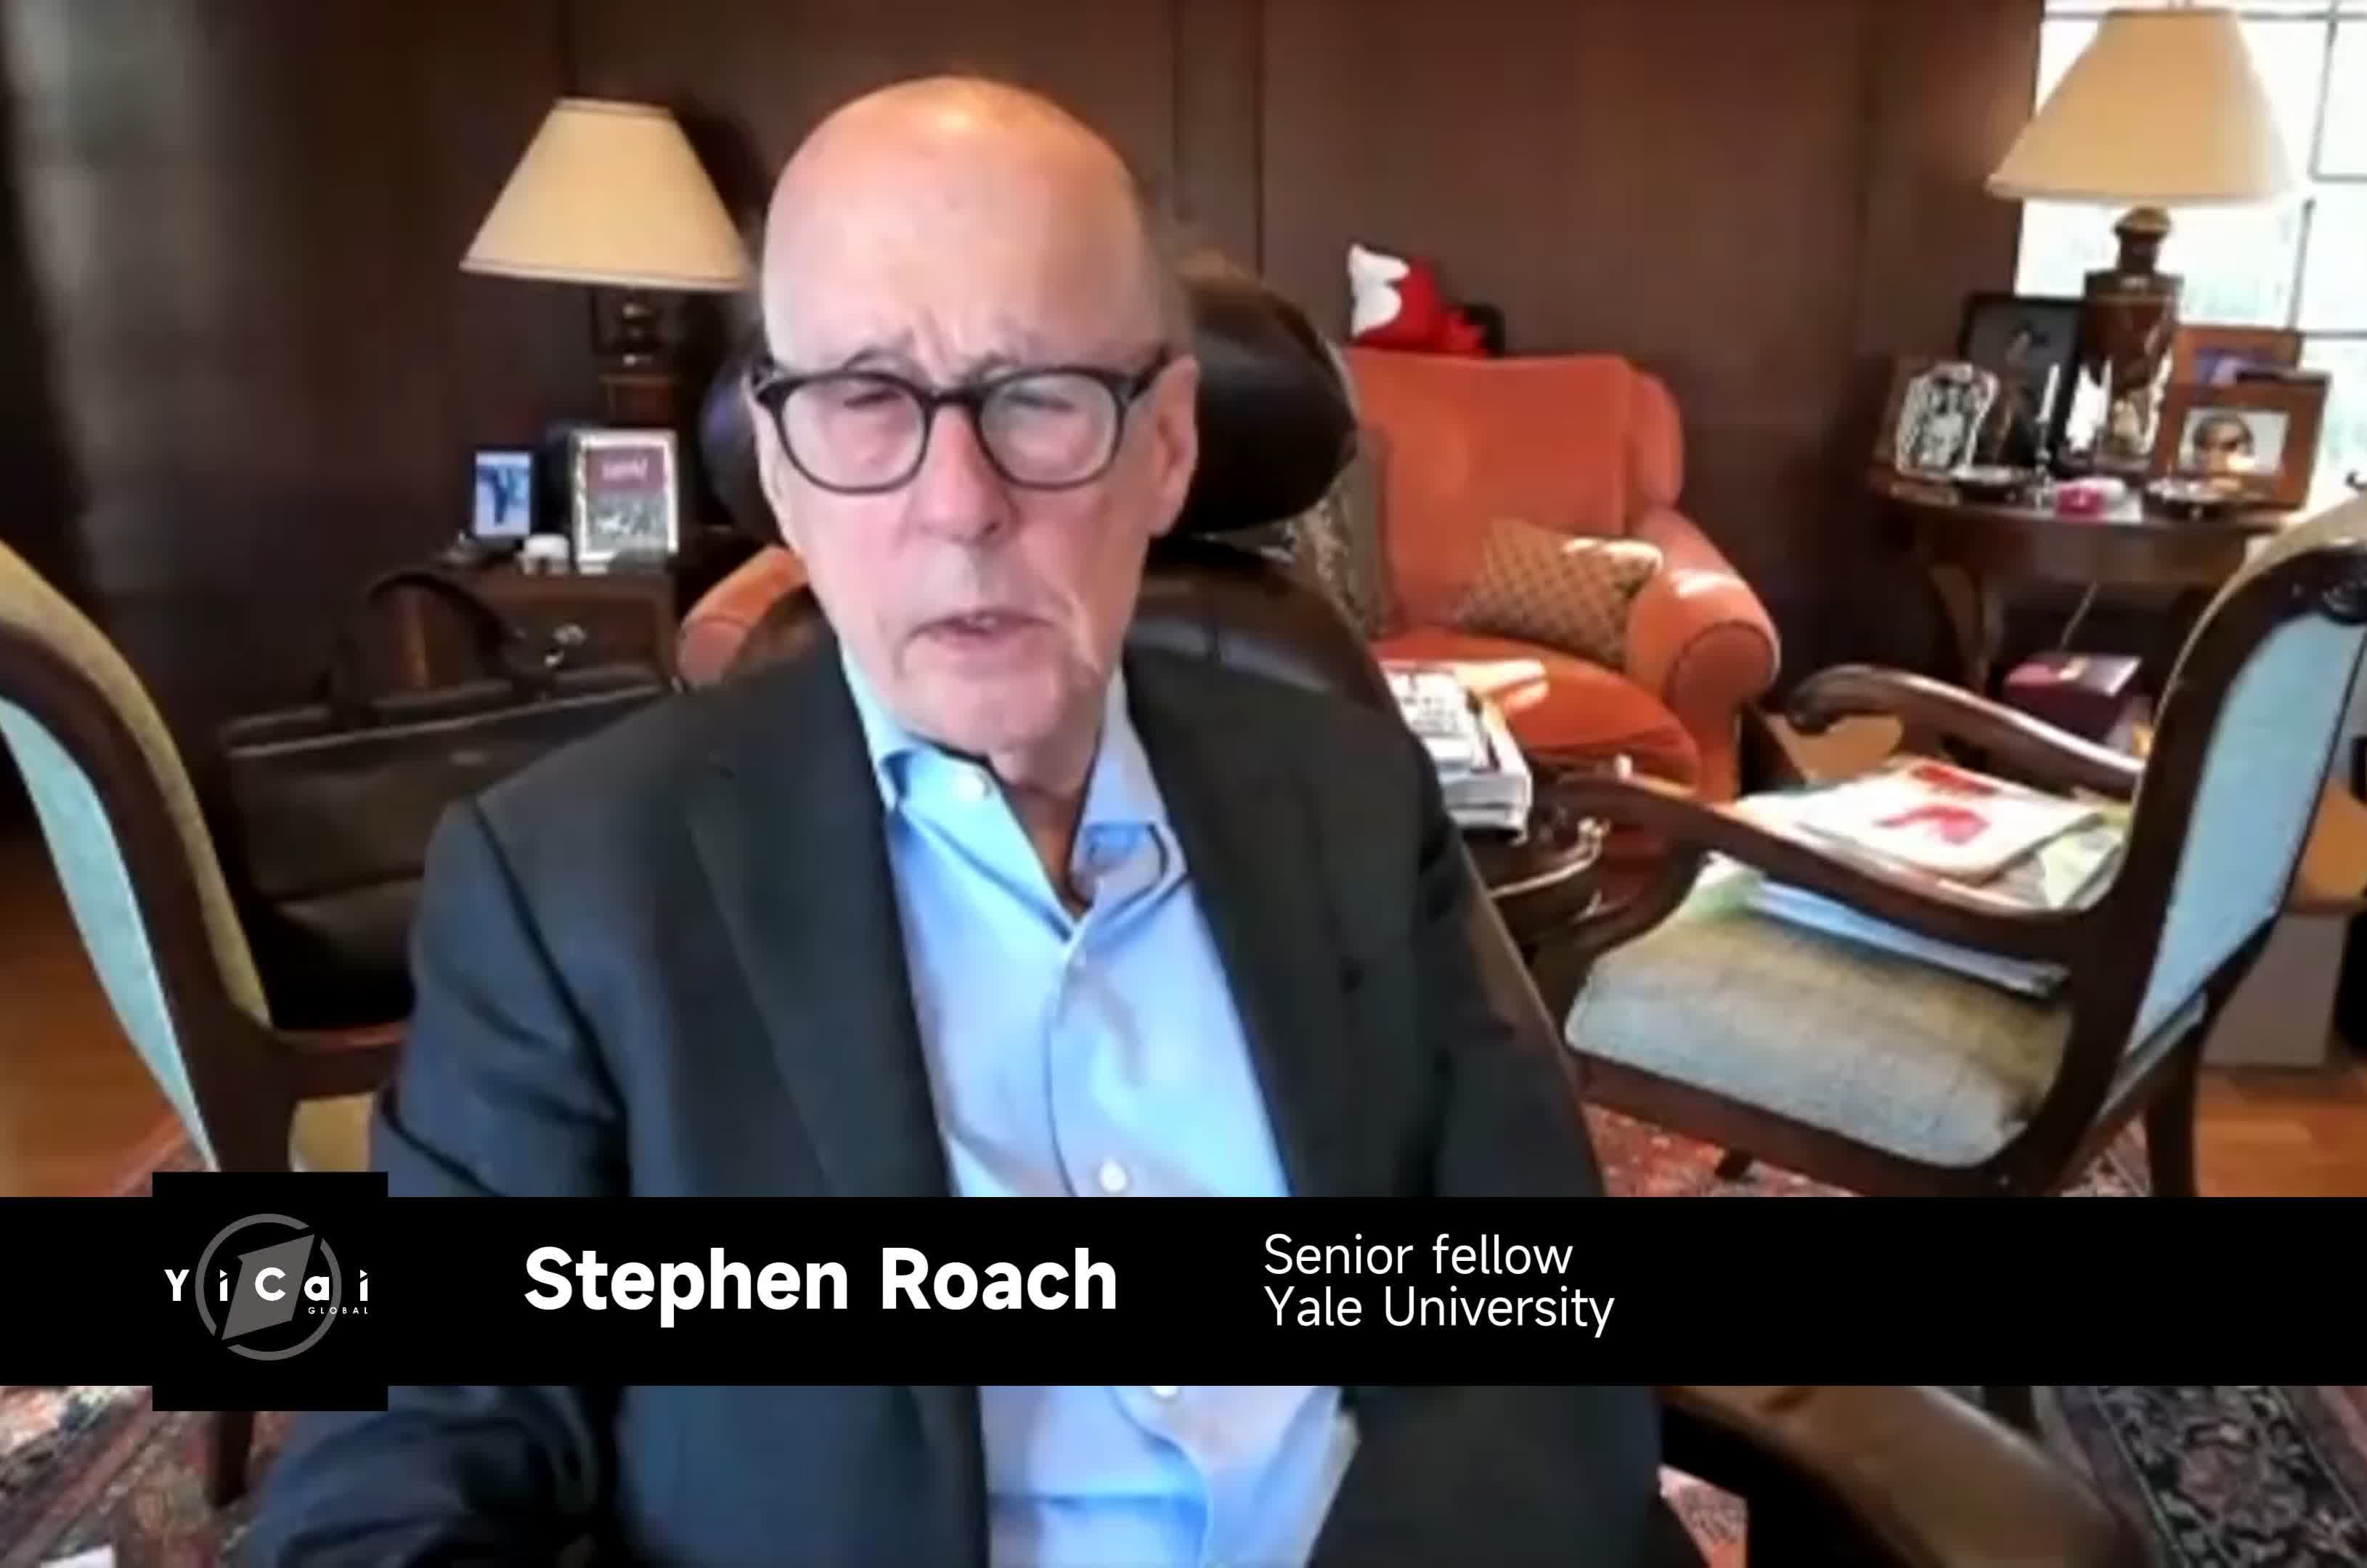 China’s Strength Is Having the Courage, Vision to Put Through Tough Reforms, Stephen Roach Says